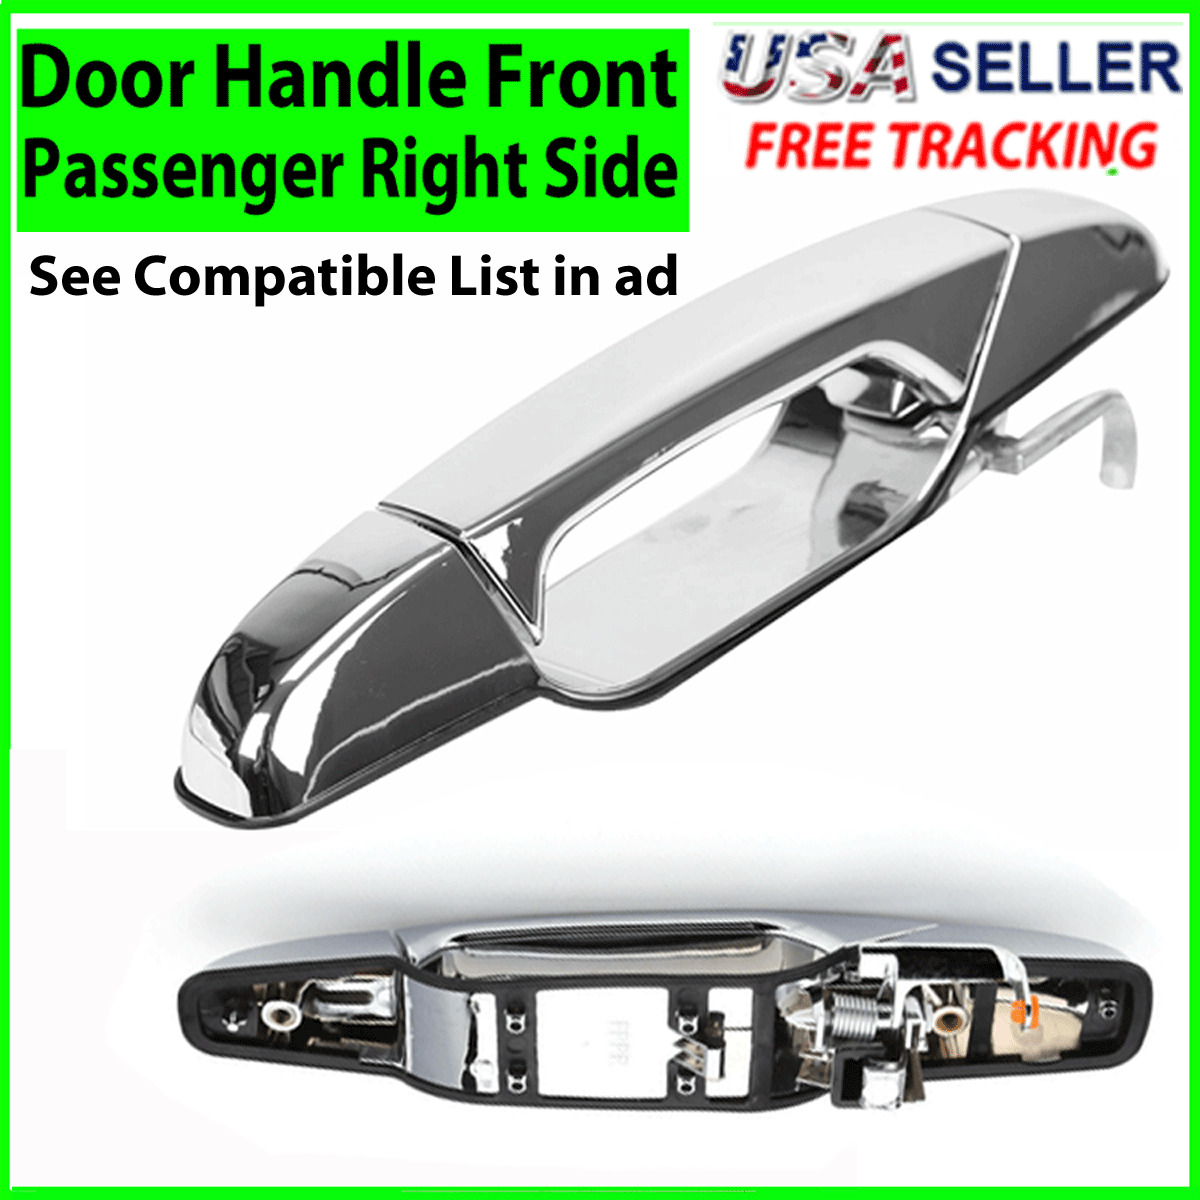 Chrome Door Handle Front Passenger Right Side RH for 2007-2013 Chevy GMC Outside